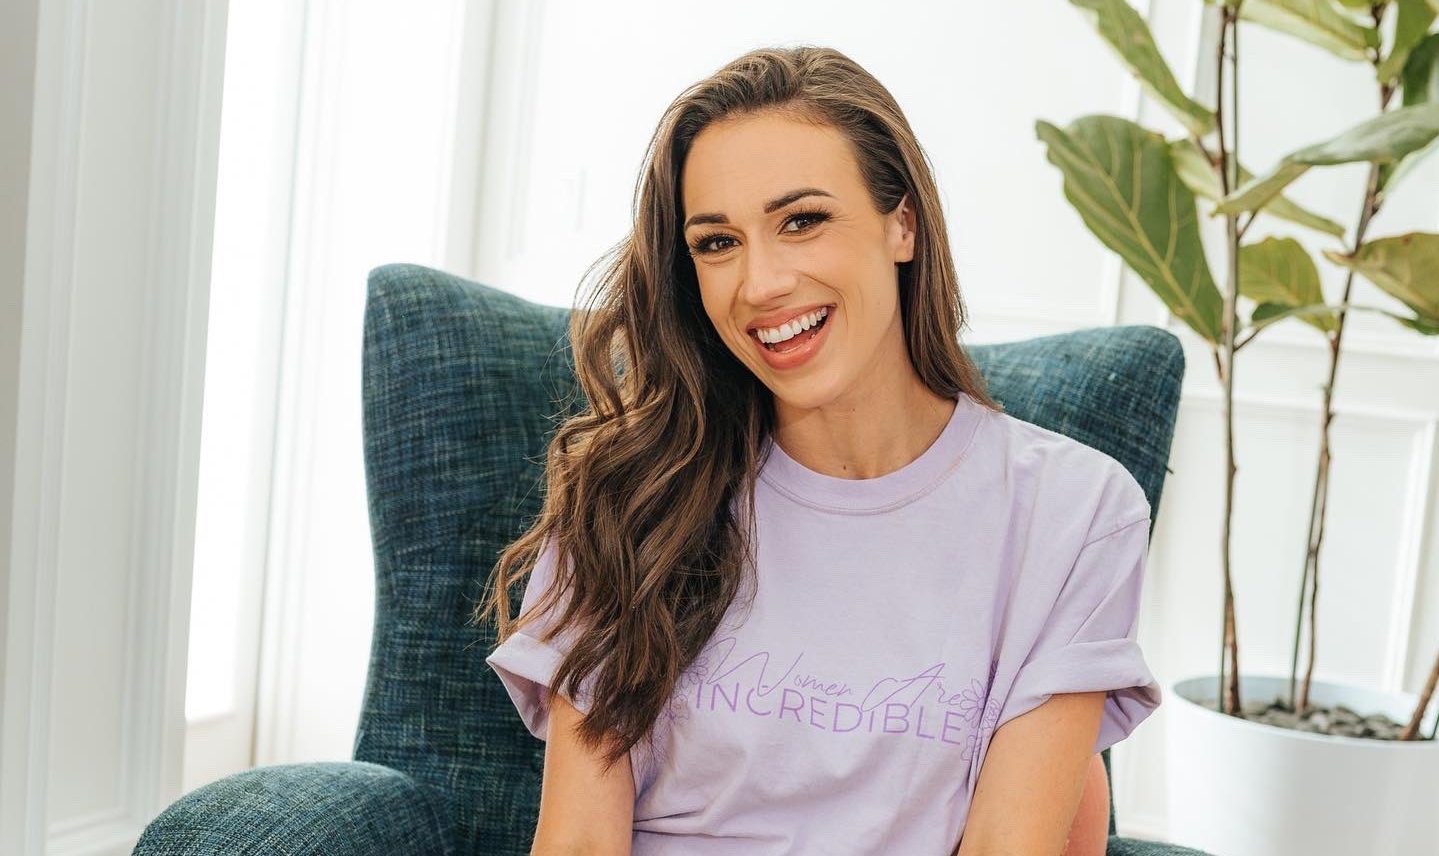 Colleen Ballinger: Net worth, age, relationship, career, family and more